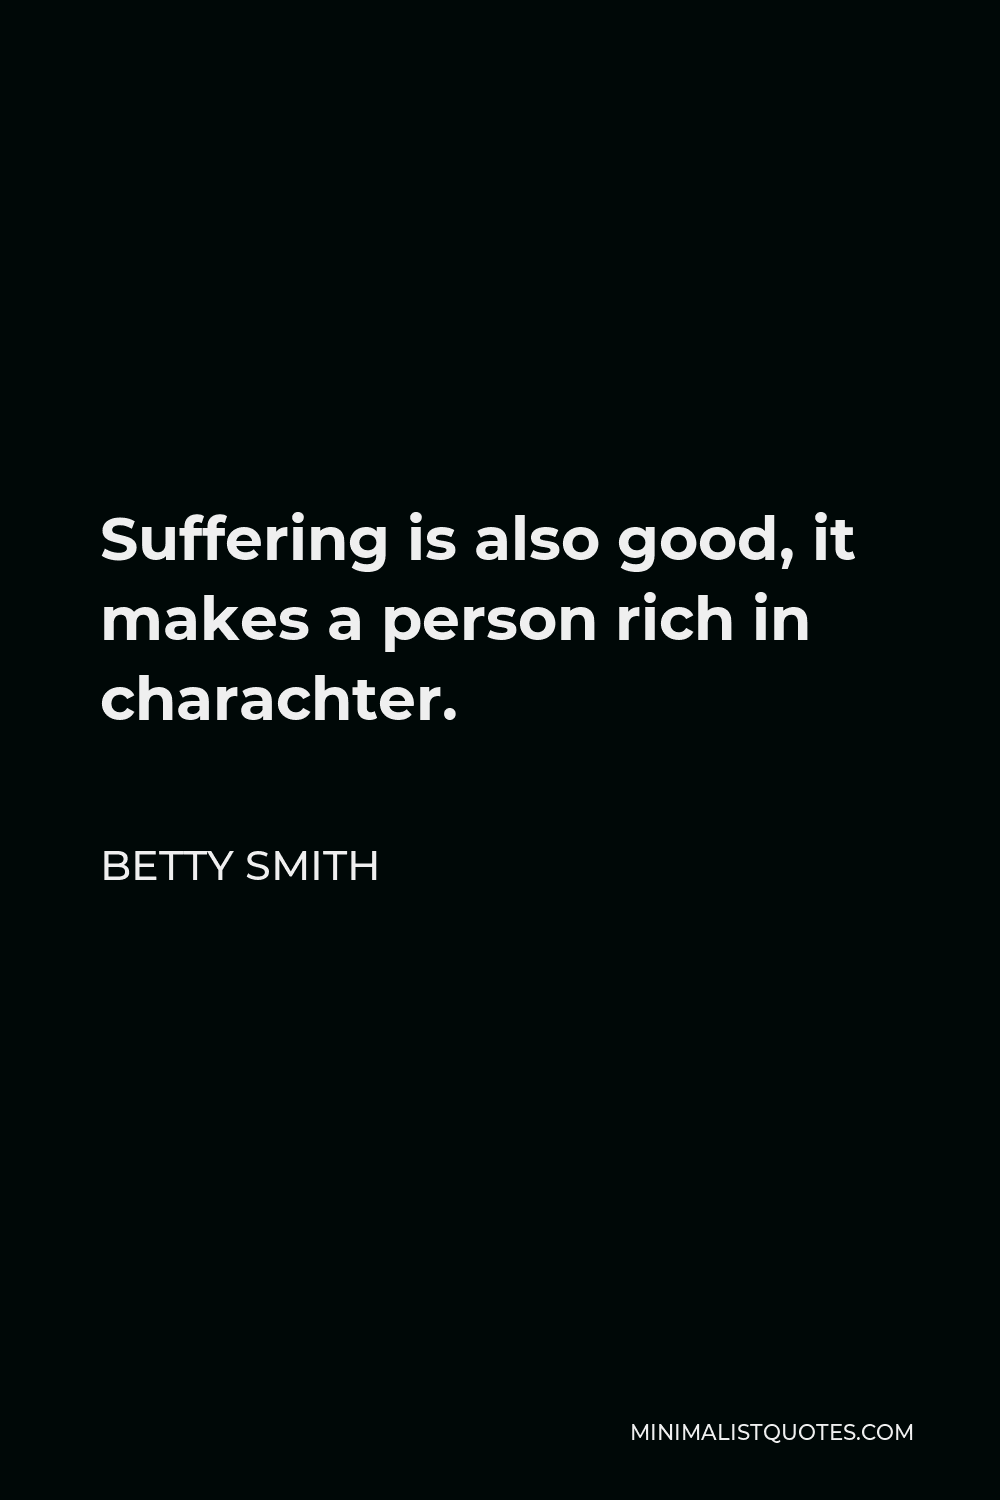 Betty Smith Quote - Suffering is also good, it makes a person rich in charachter.